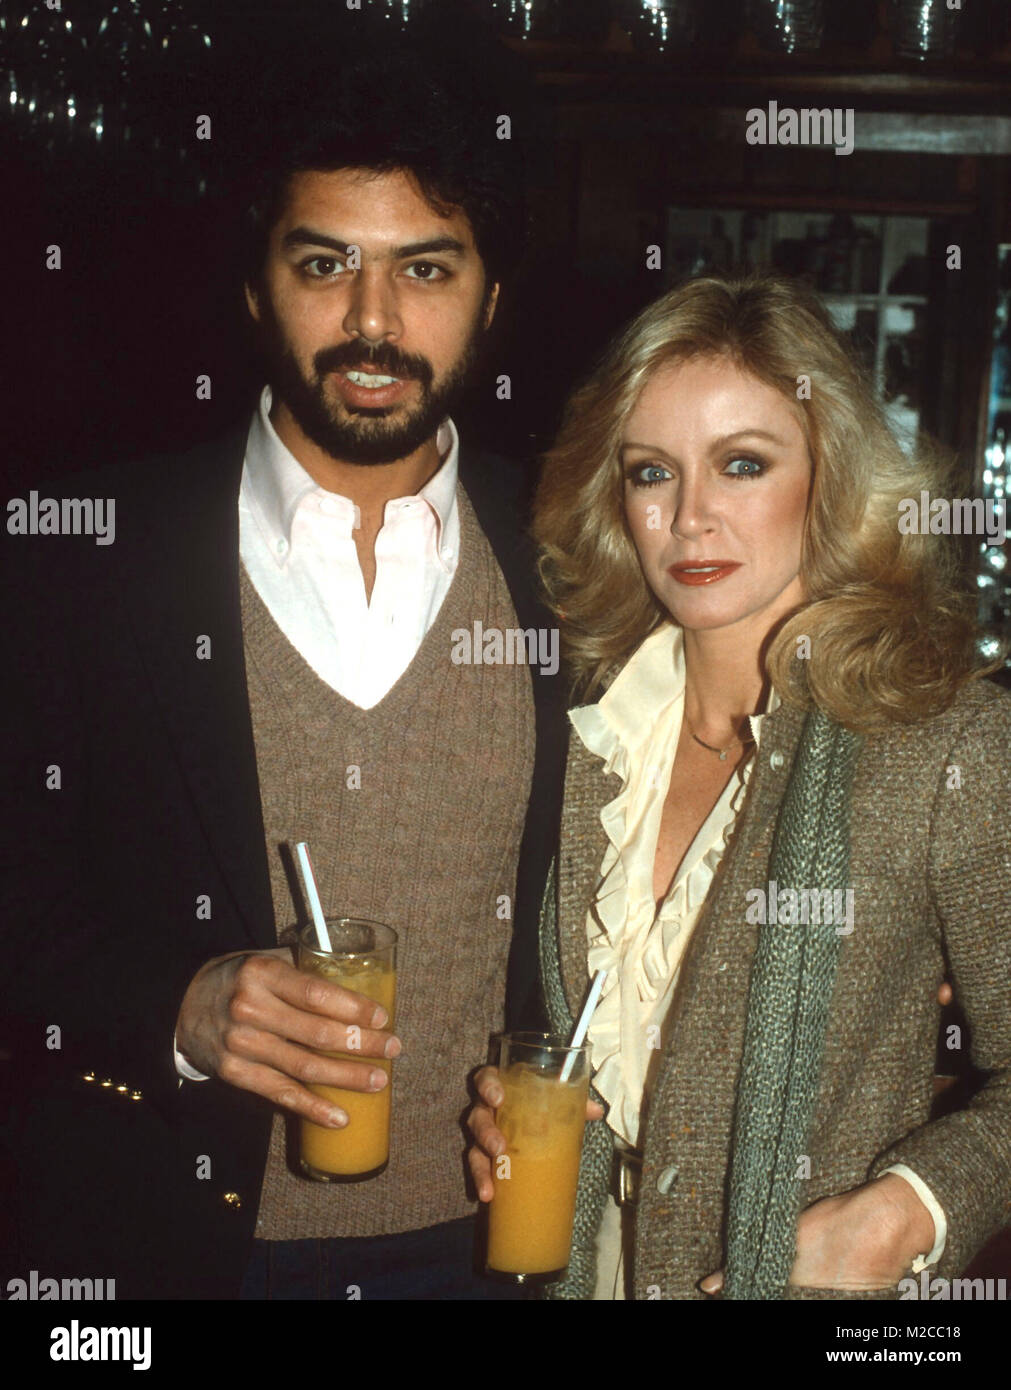 LOS ANGELES, CA - JANUARY 10: Richard Holland and actress Donna Mills attends the 'Entertainment Tonight' 100th Episode Celebration at Su Ling Restaurant on January 10, 1982 in Los Angeles, California. Photo by Barry King/Alamy Stock  Photo Stock Photo